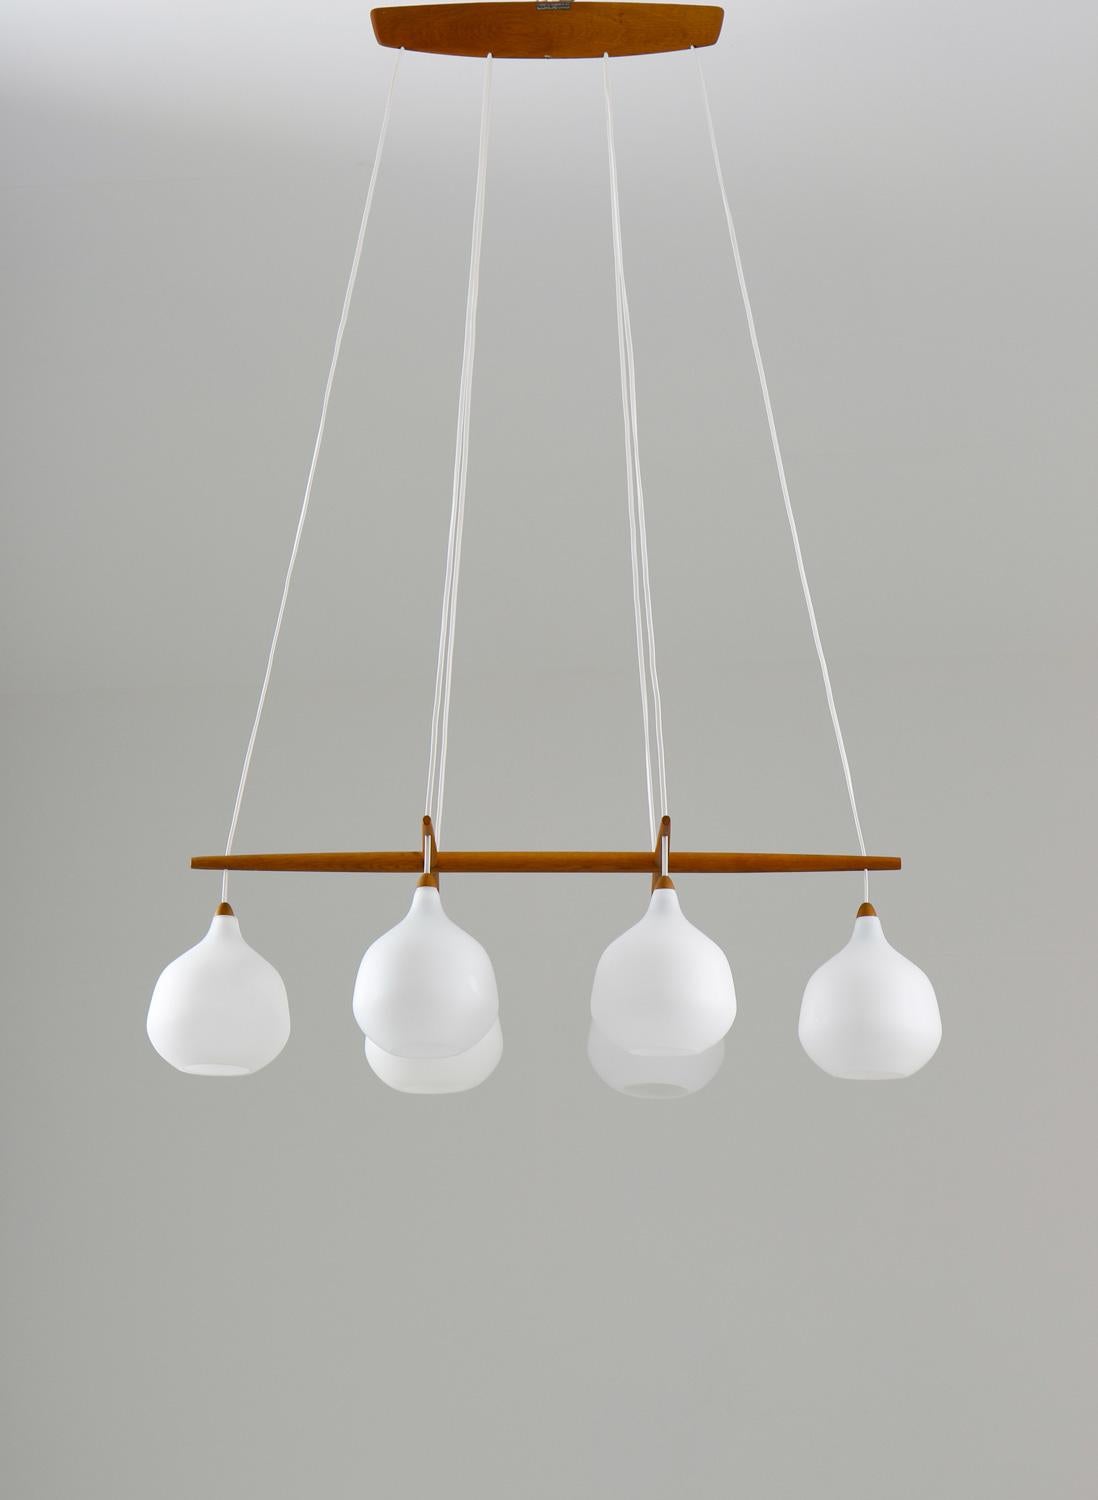 Very rare chandelier model 556 by Uno & Östen Kristiansson for Luxus, Sweden.
The chandelier features six opaline glass globes, separated by an elegant divider in teak, which can be moved to adjust the height of the globes. The frosted opaline